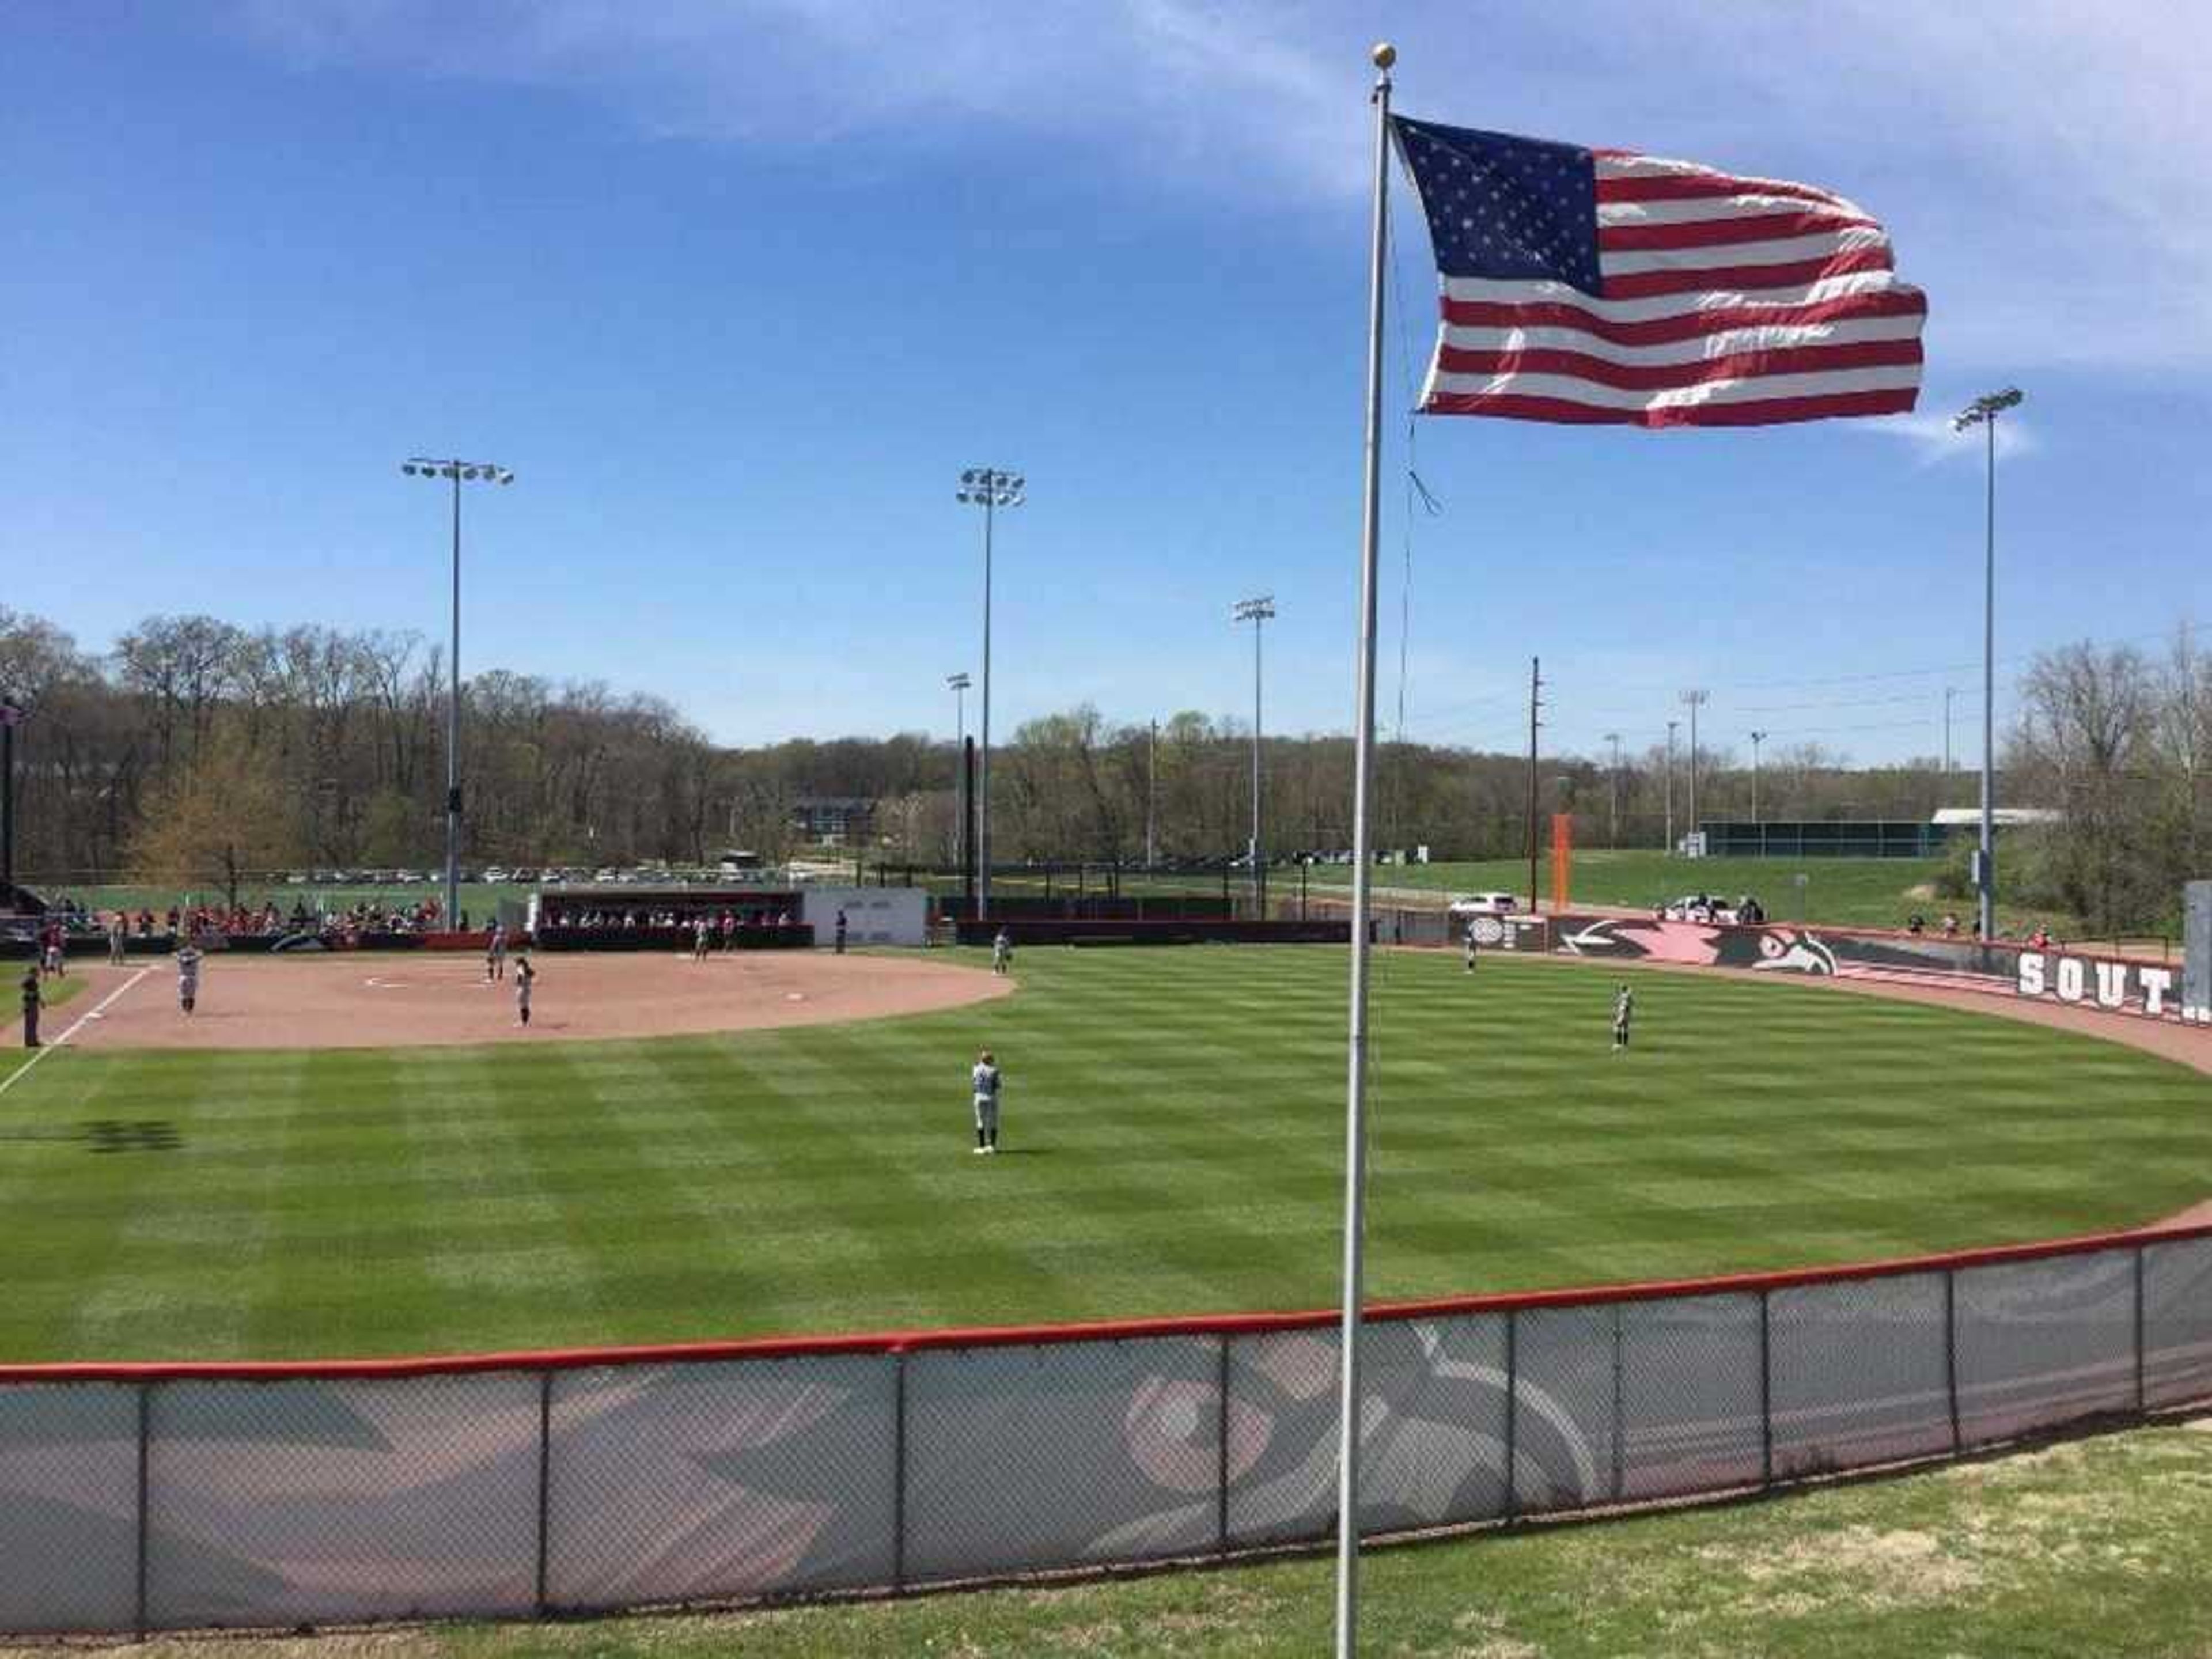 The American flag overlooks the Southeast Softball Complex on a clear day in 2017.